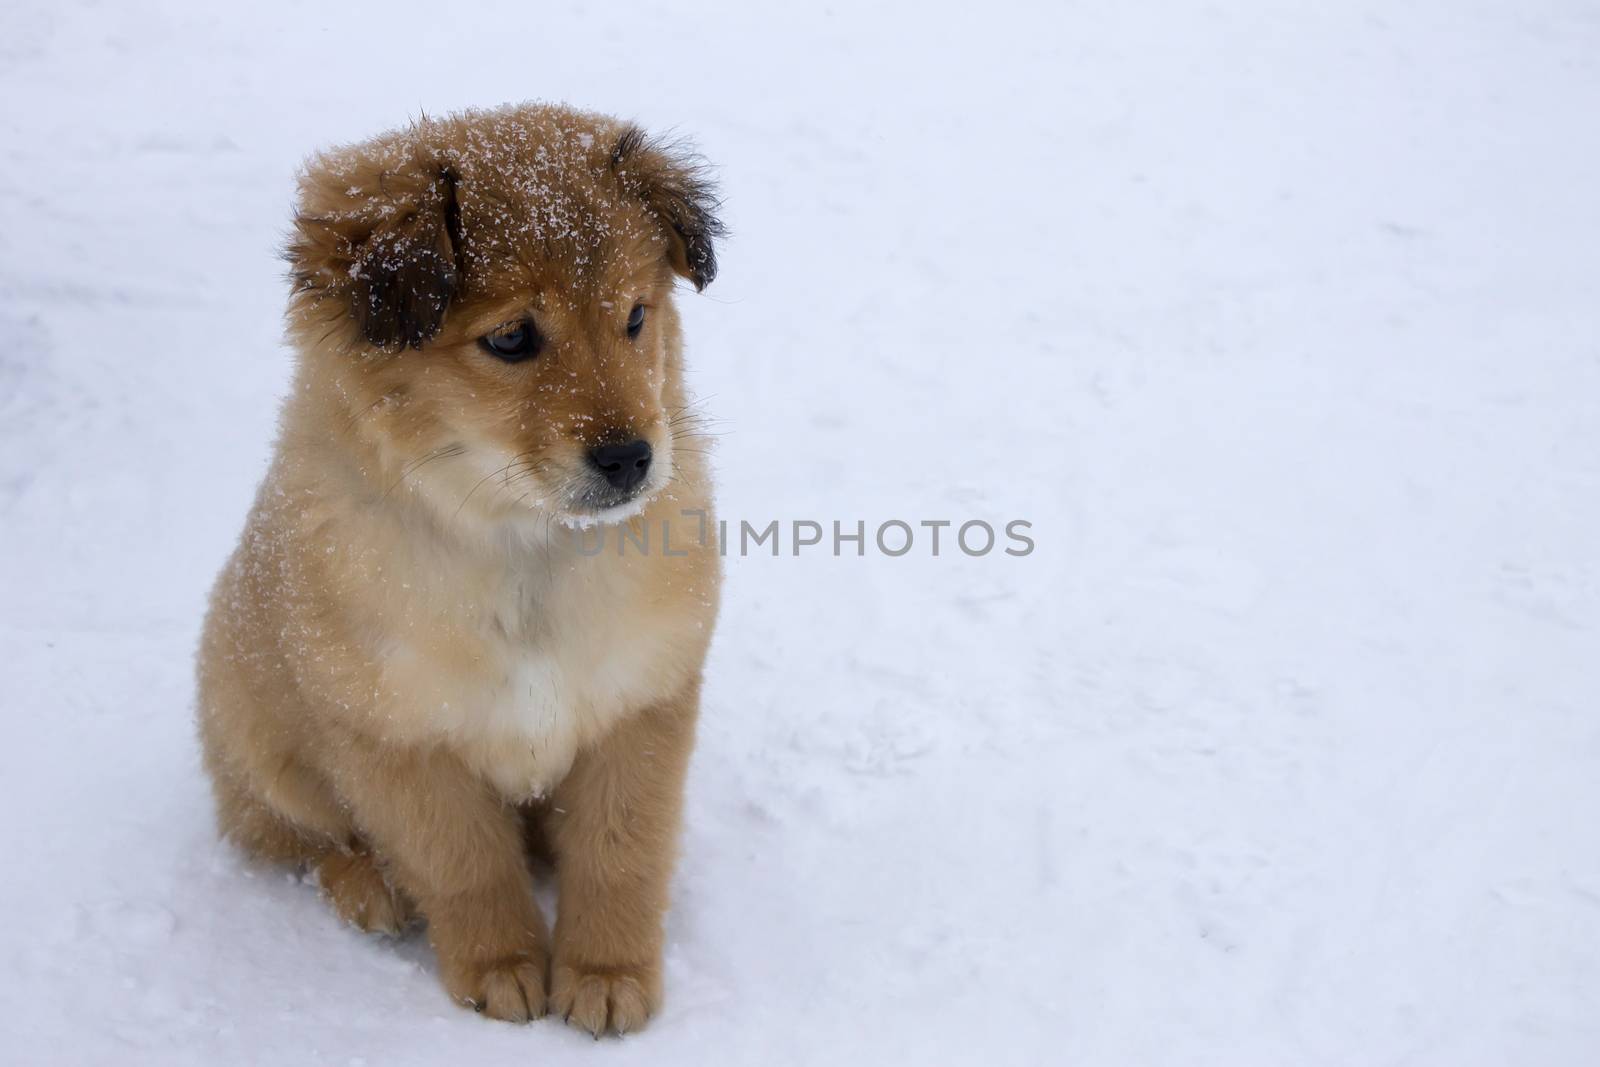 Sad and lonely puppy sitting on the cold snow